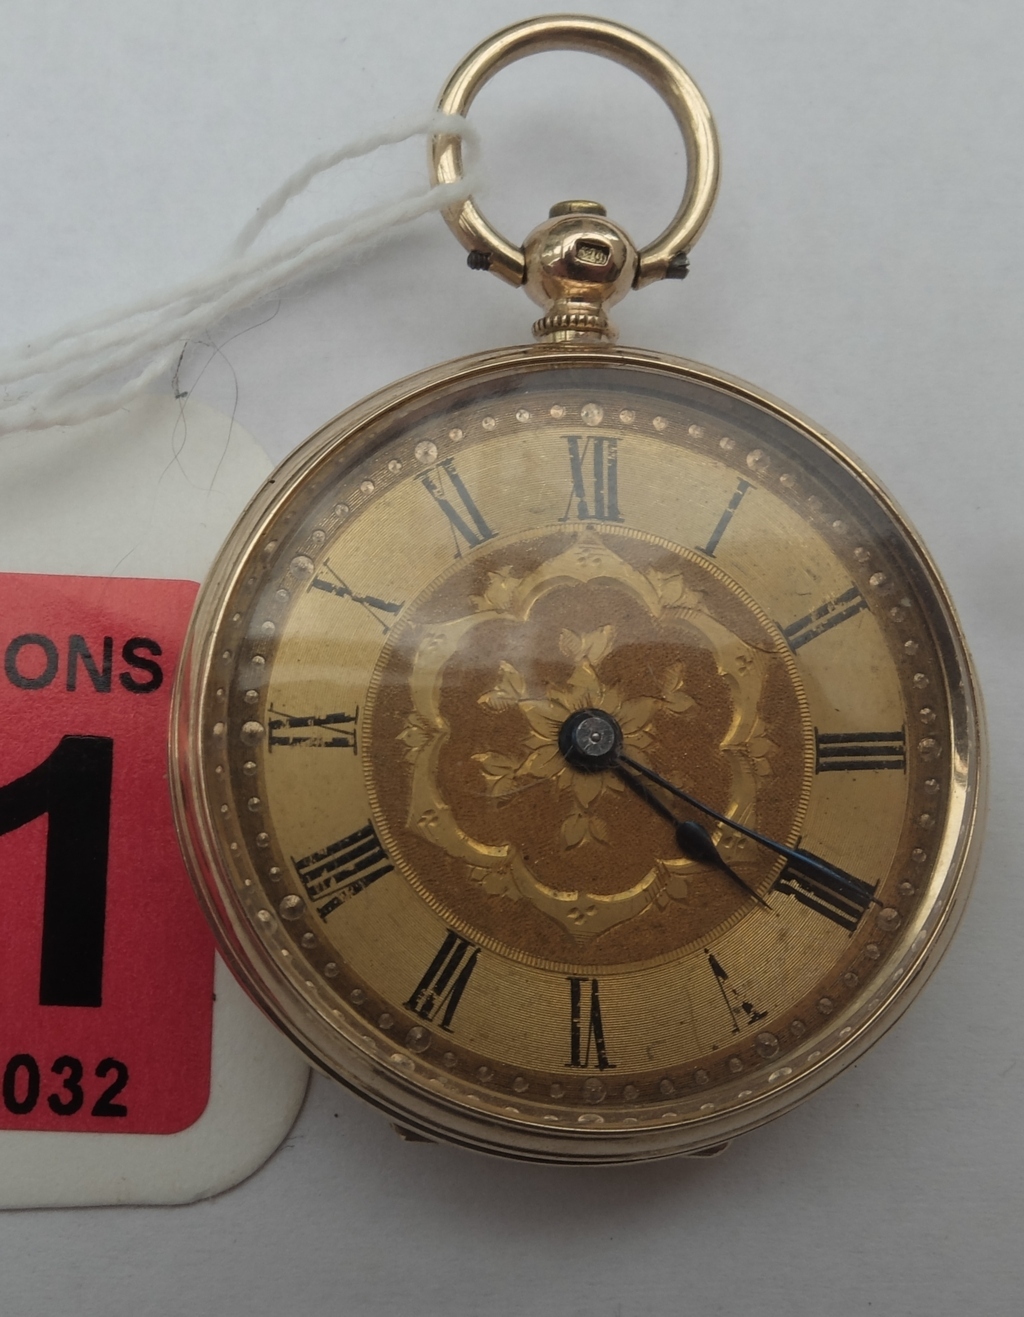 Antique 14kt Gold Pocket Watch with 30mm dial. - Image 2 of 5